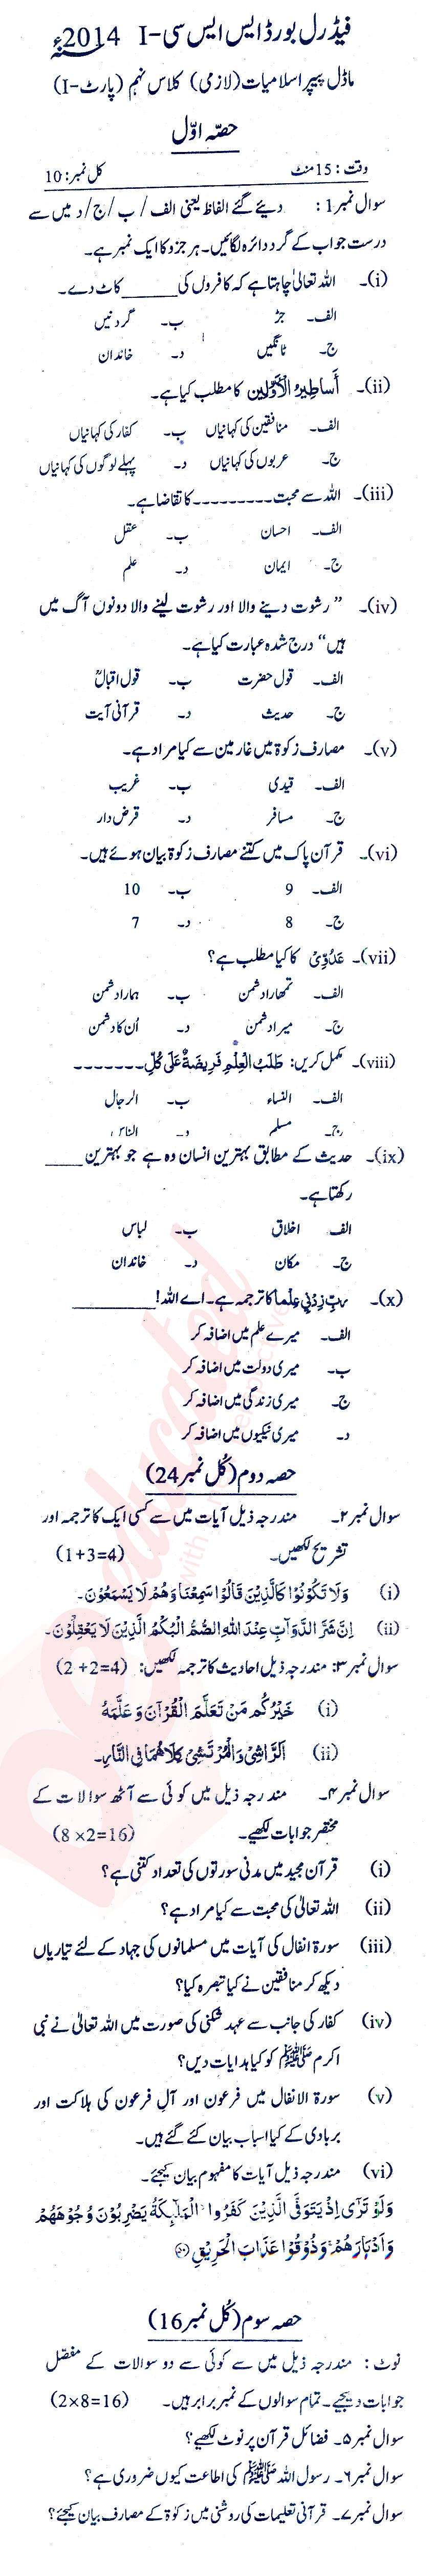 Islamiat (Compulsory) 9th class Past Paper Group 1 Federal BISE  2014